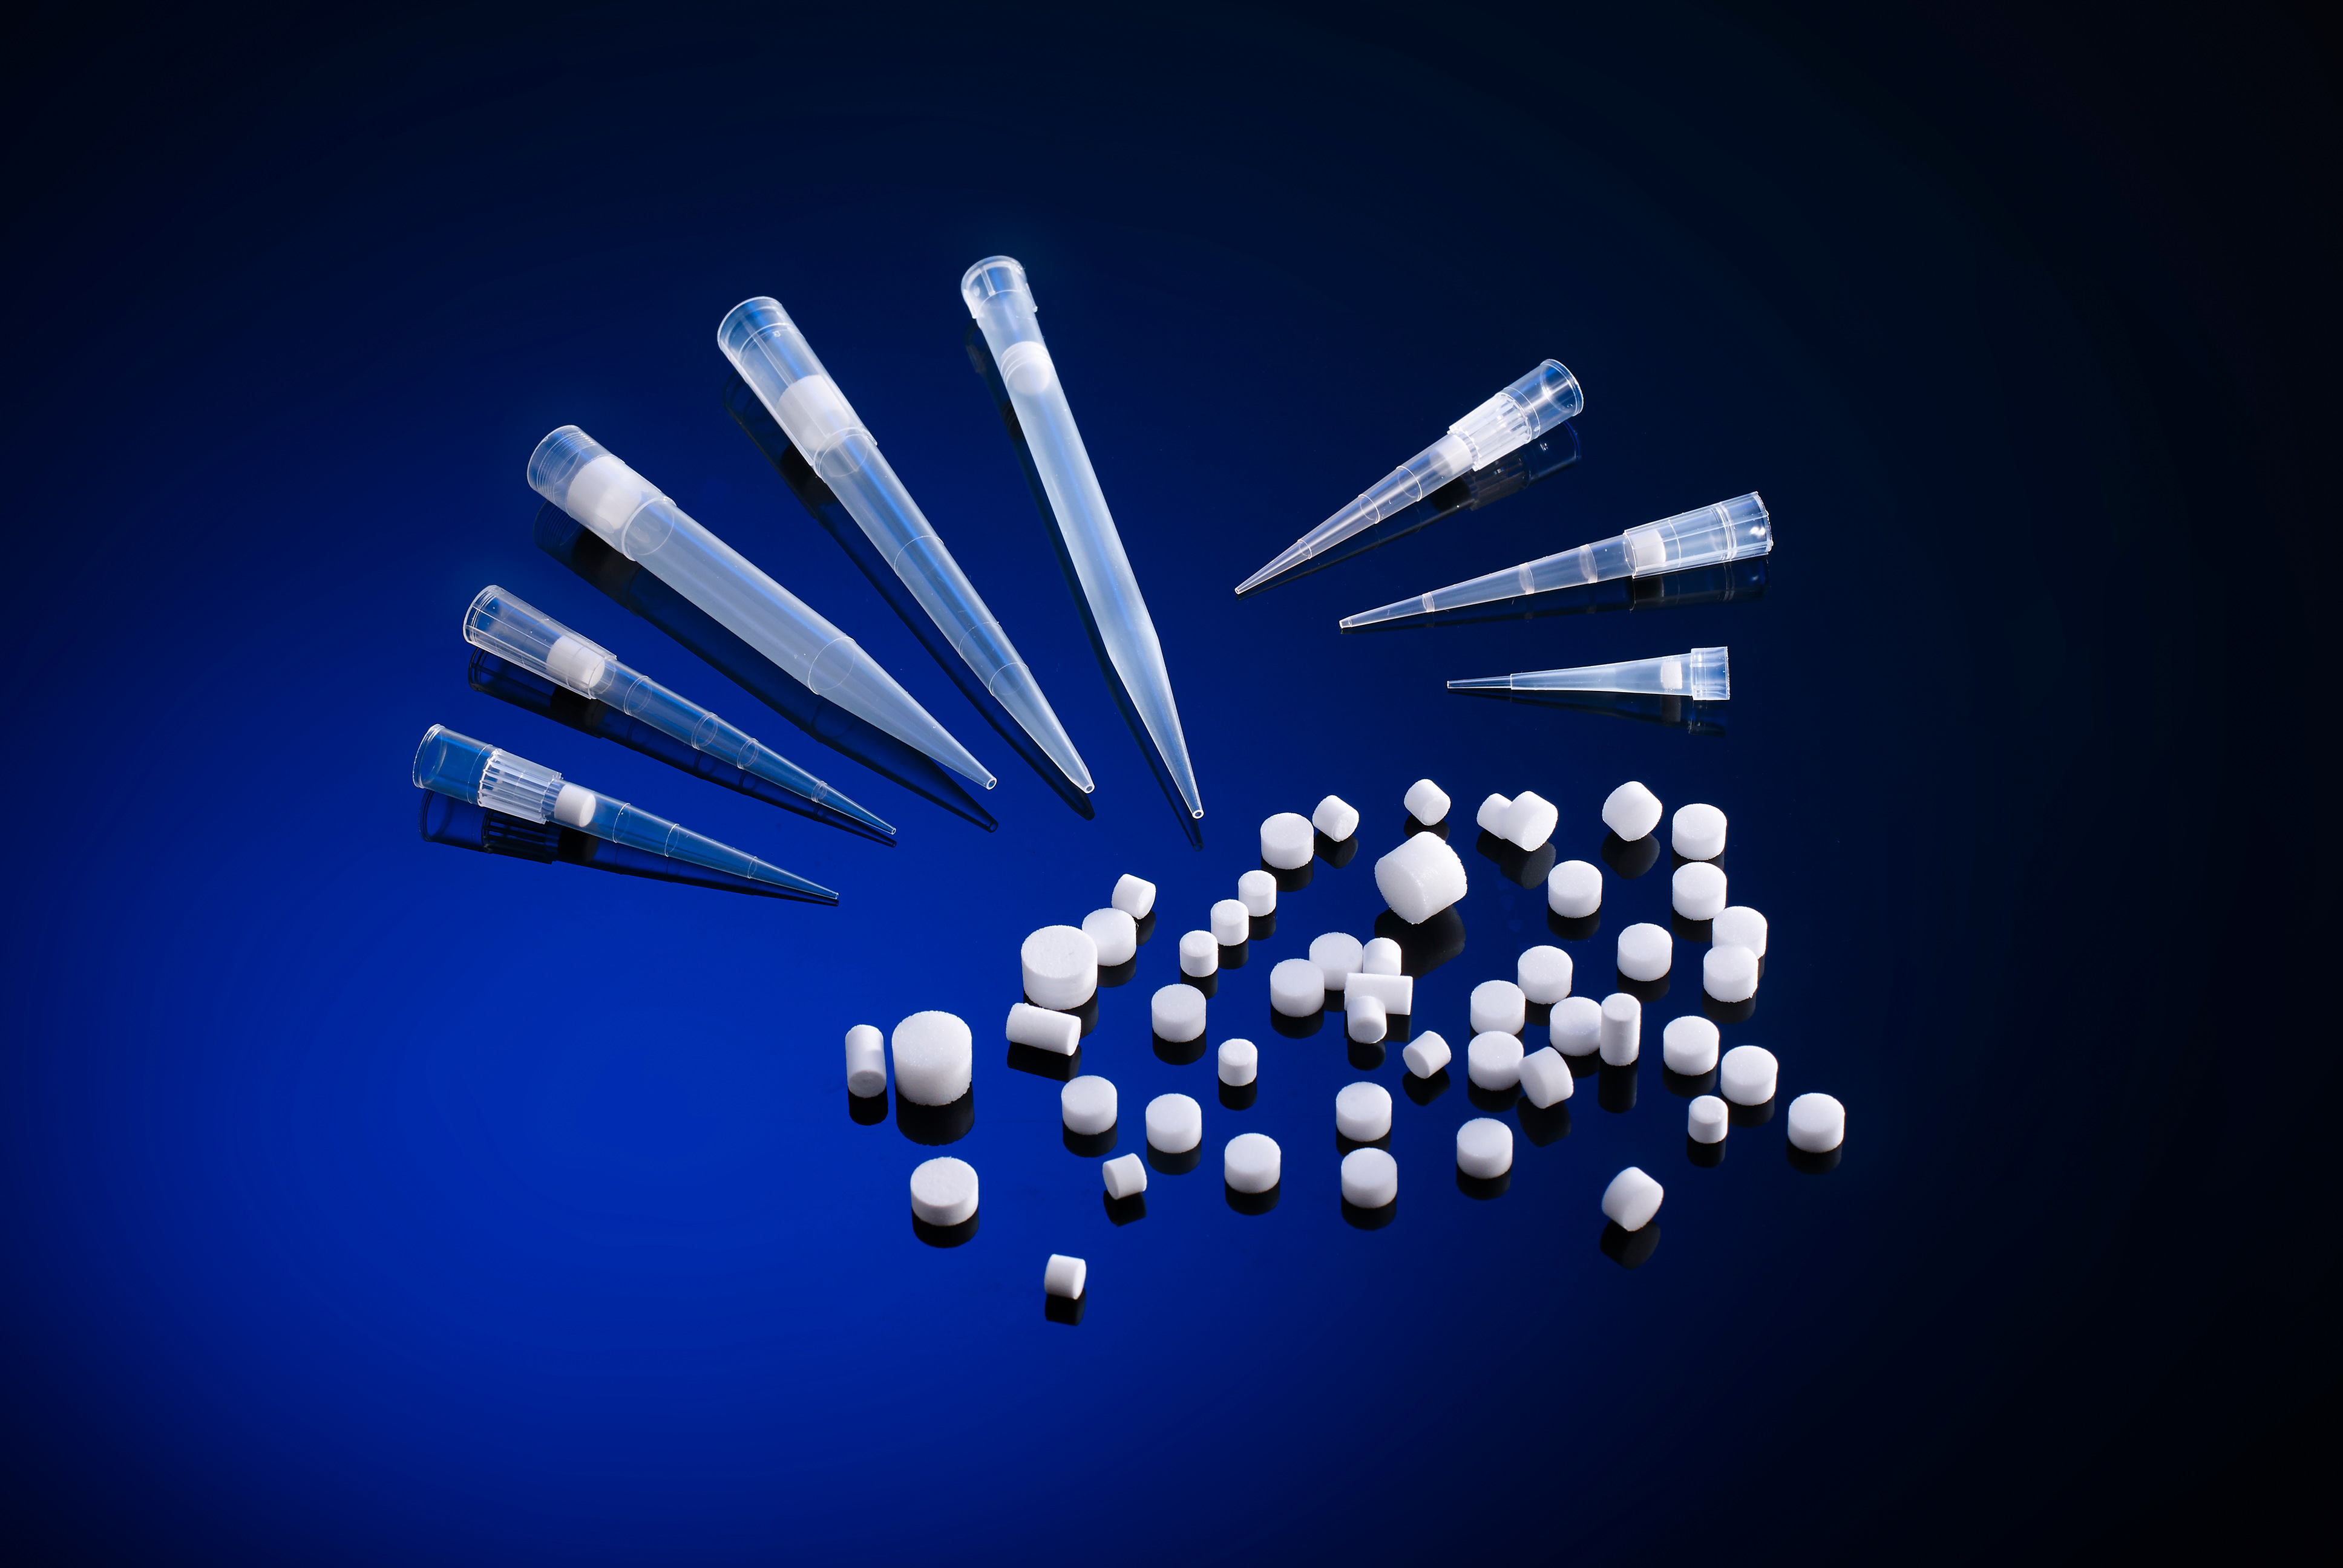 The new pipette tip filters are fully compliant with FDA, USP Class VI and European Pharmacopoeia regulations.